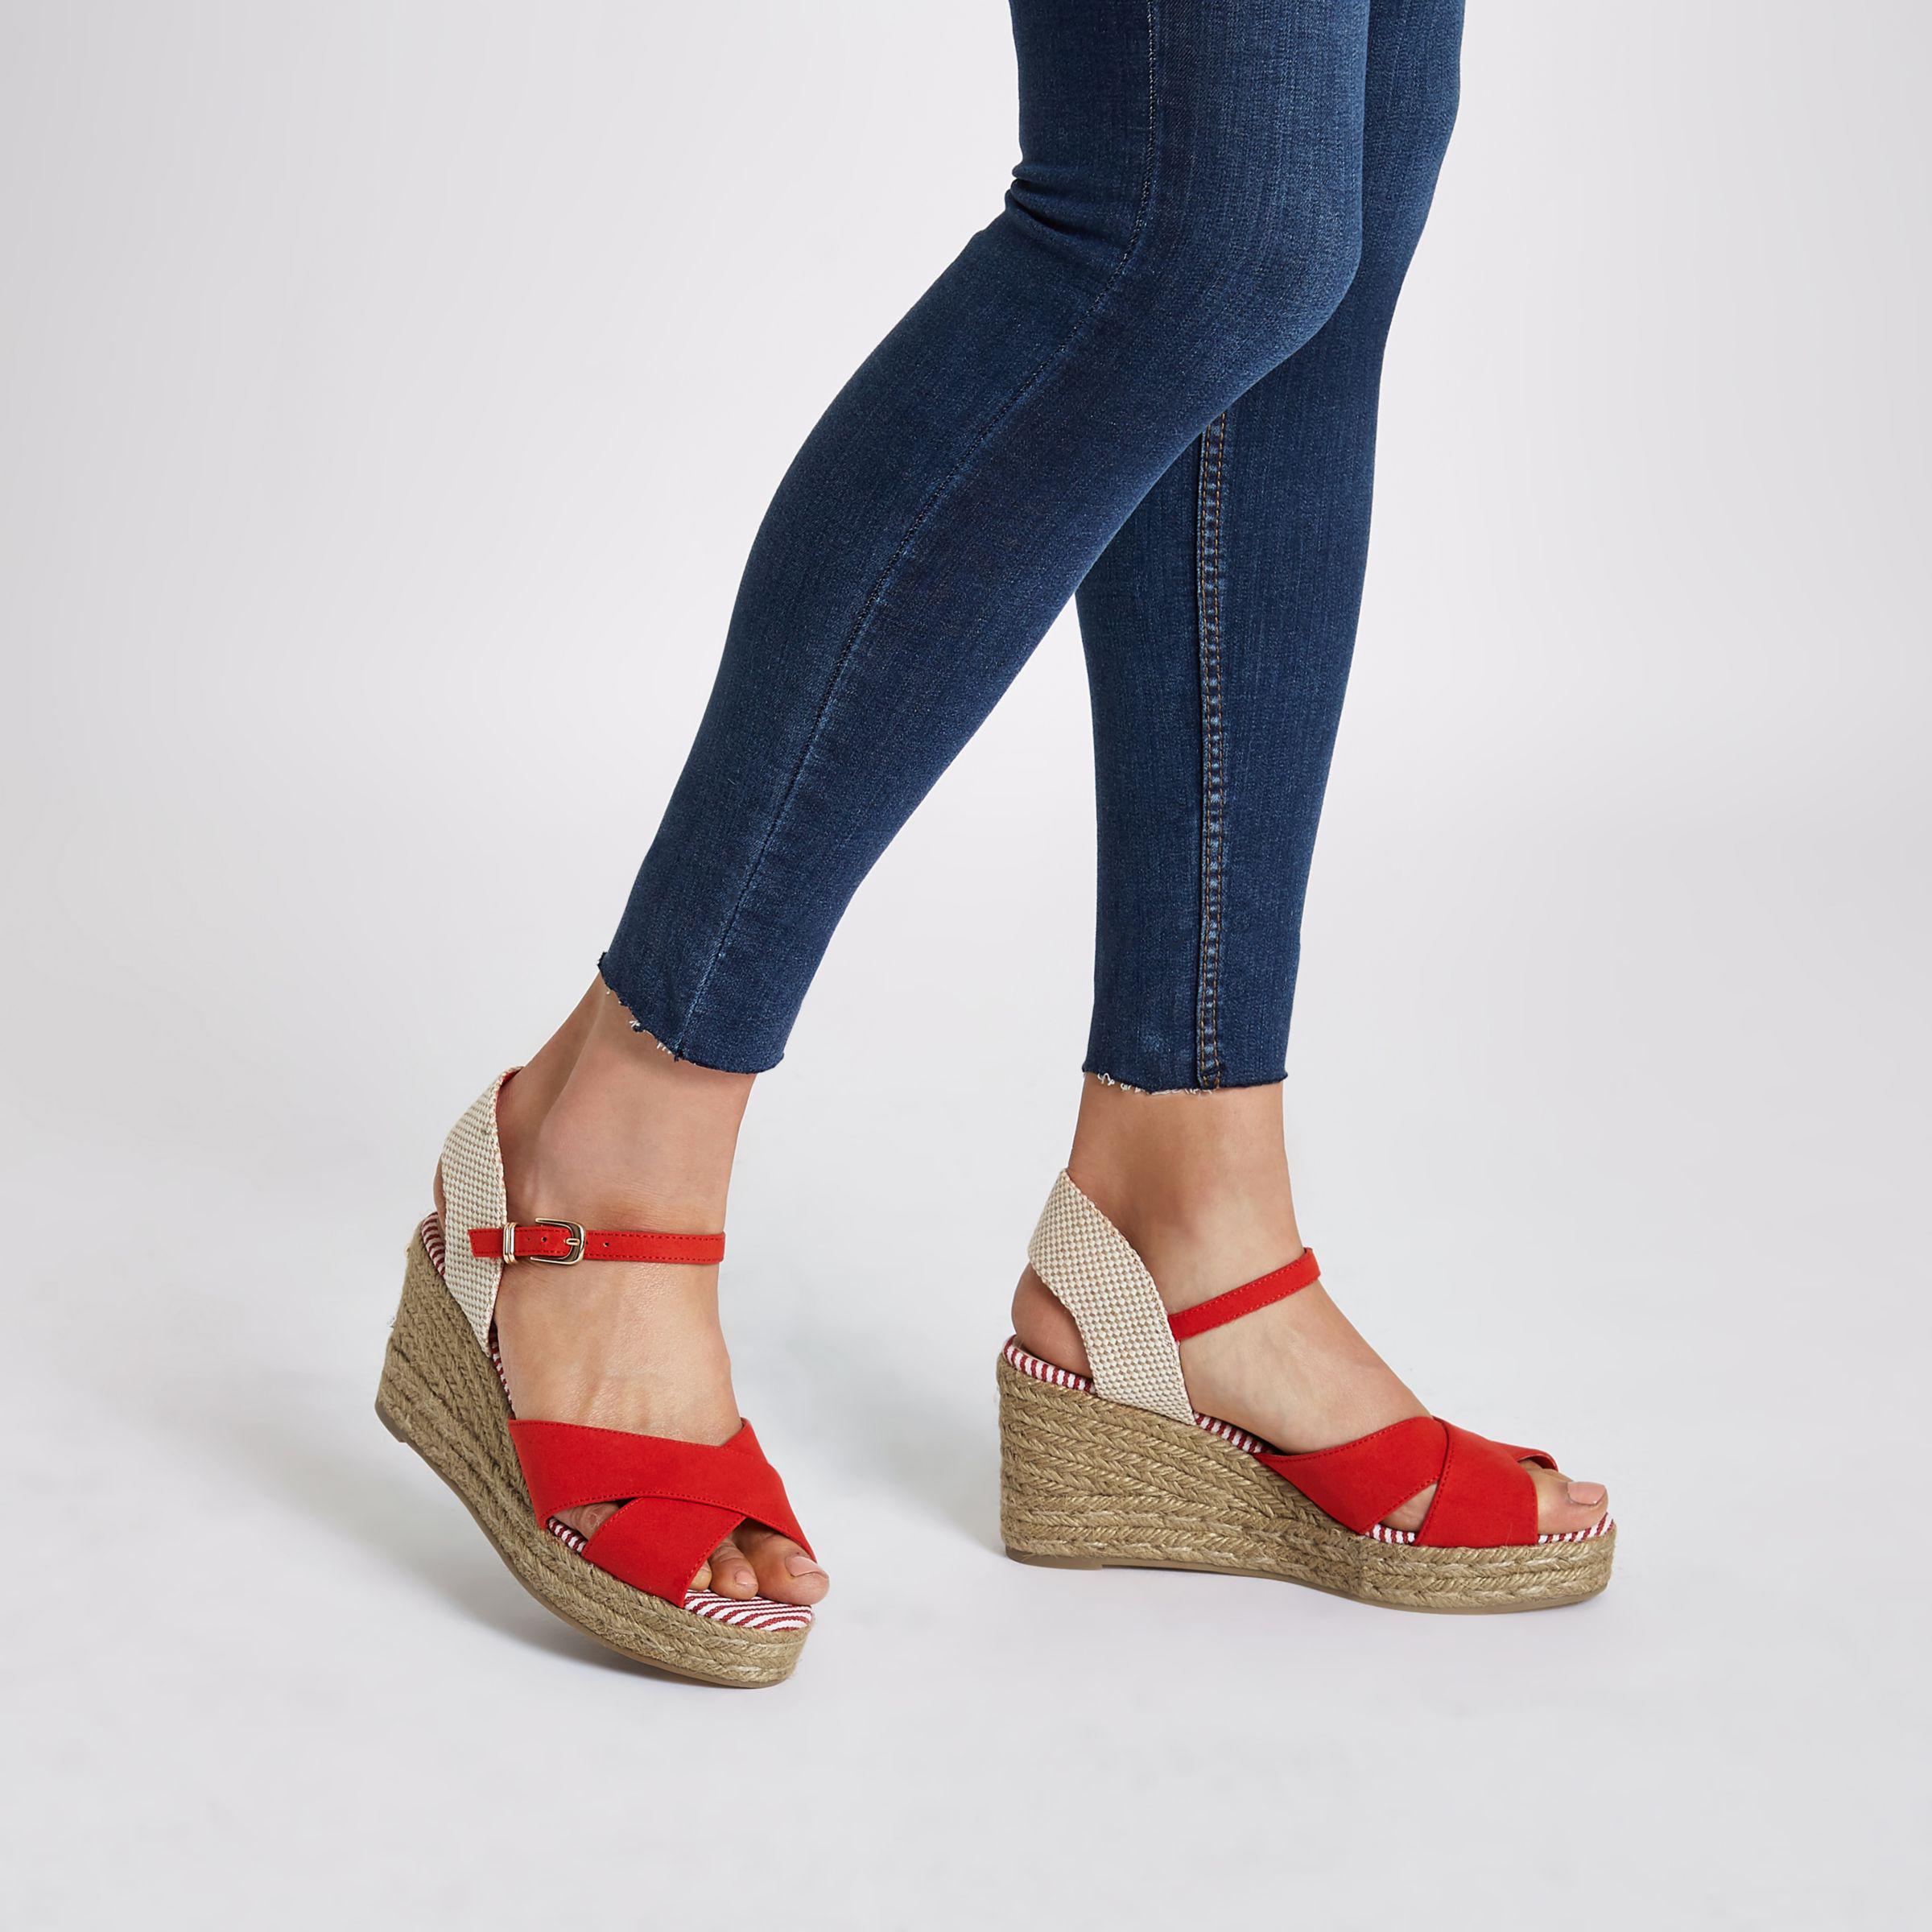 Lyst - River Island Red Cross Strap Espadrille Wedge Sandals in Red